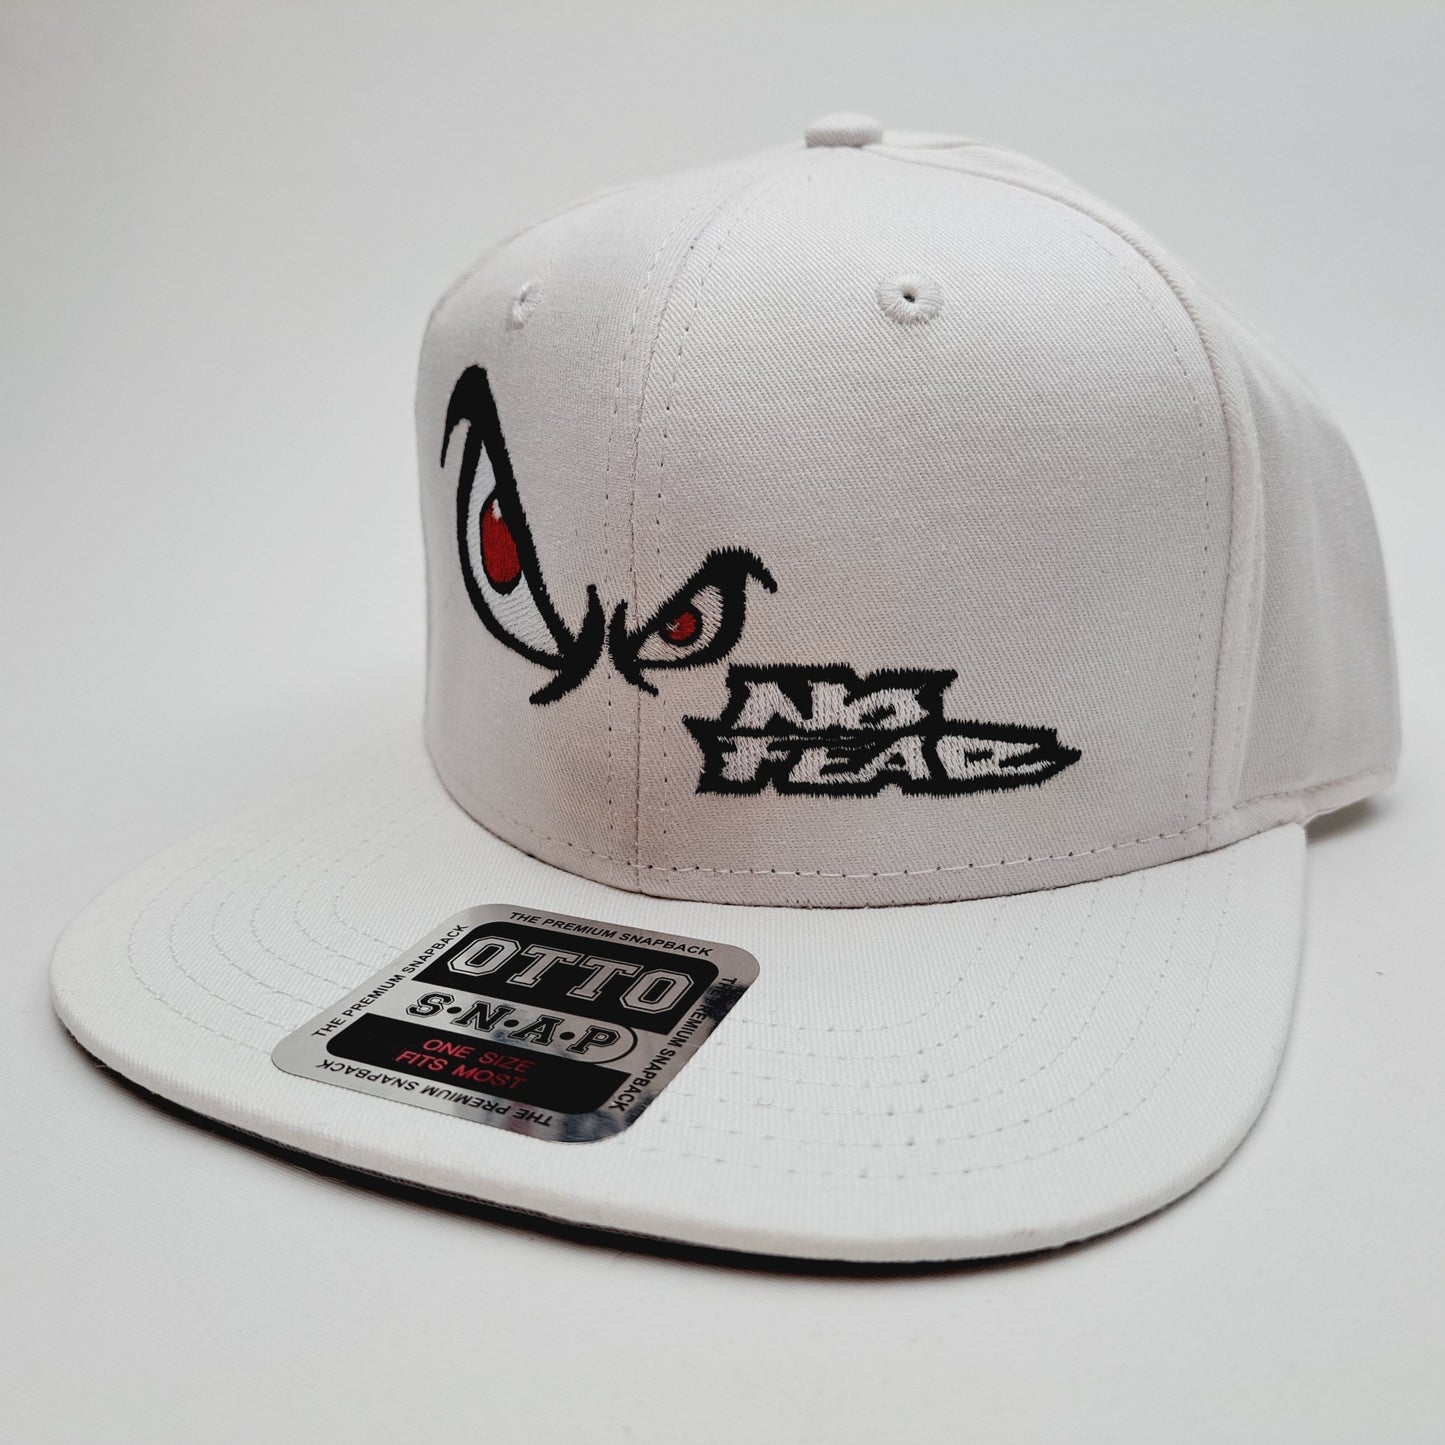 No Fear Angry Eyes Otto Curved Bill Full Cover Snapback Trucker Baseball Hat Cap White